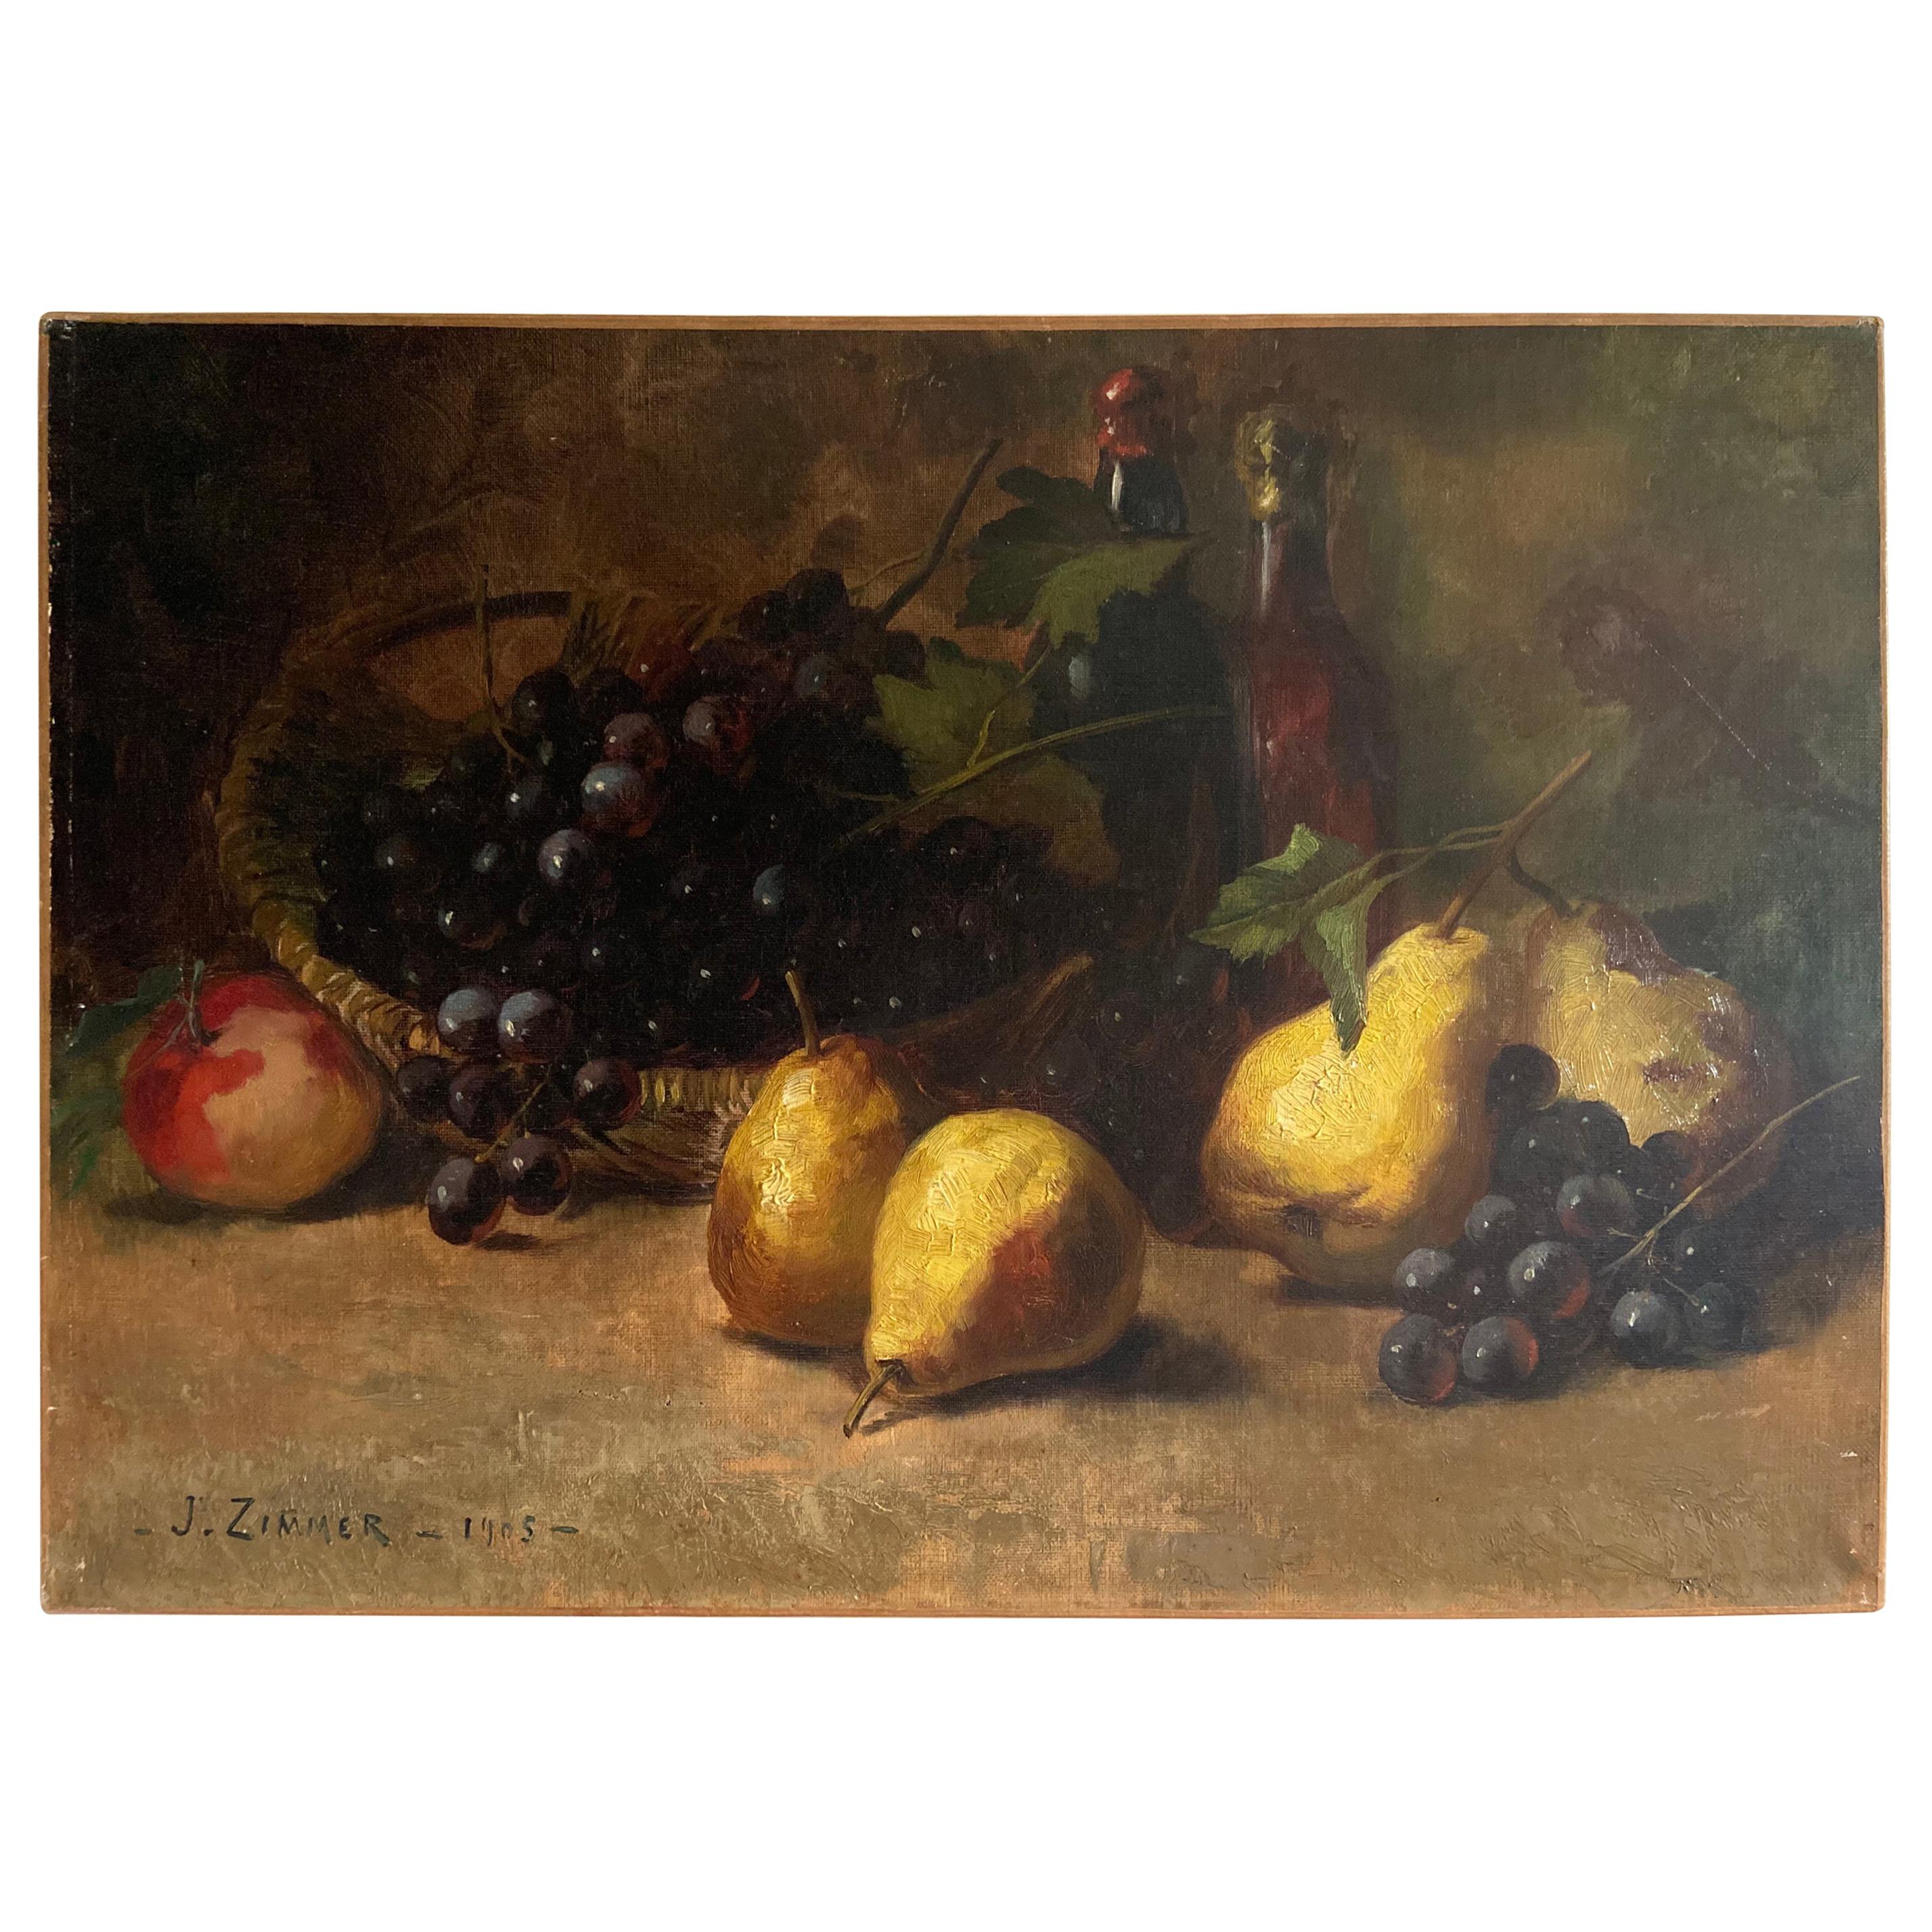 Early 20th Century Oil on Canvas Still Life with Fruits Signed by J. Zimmer